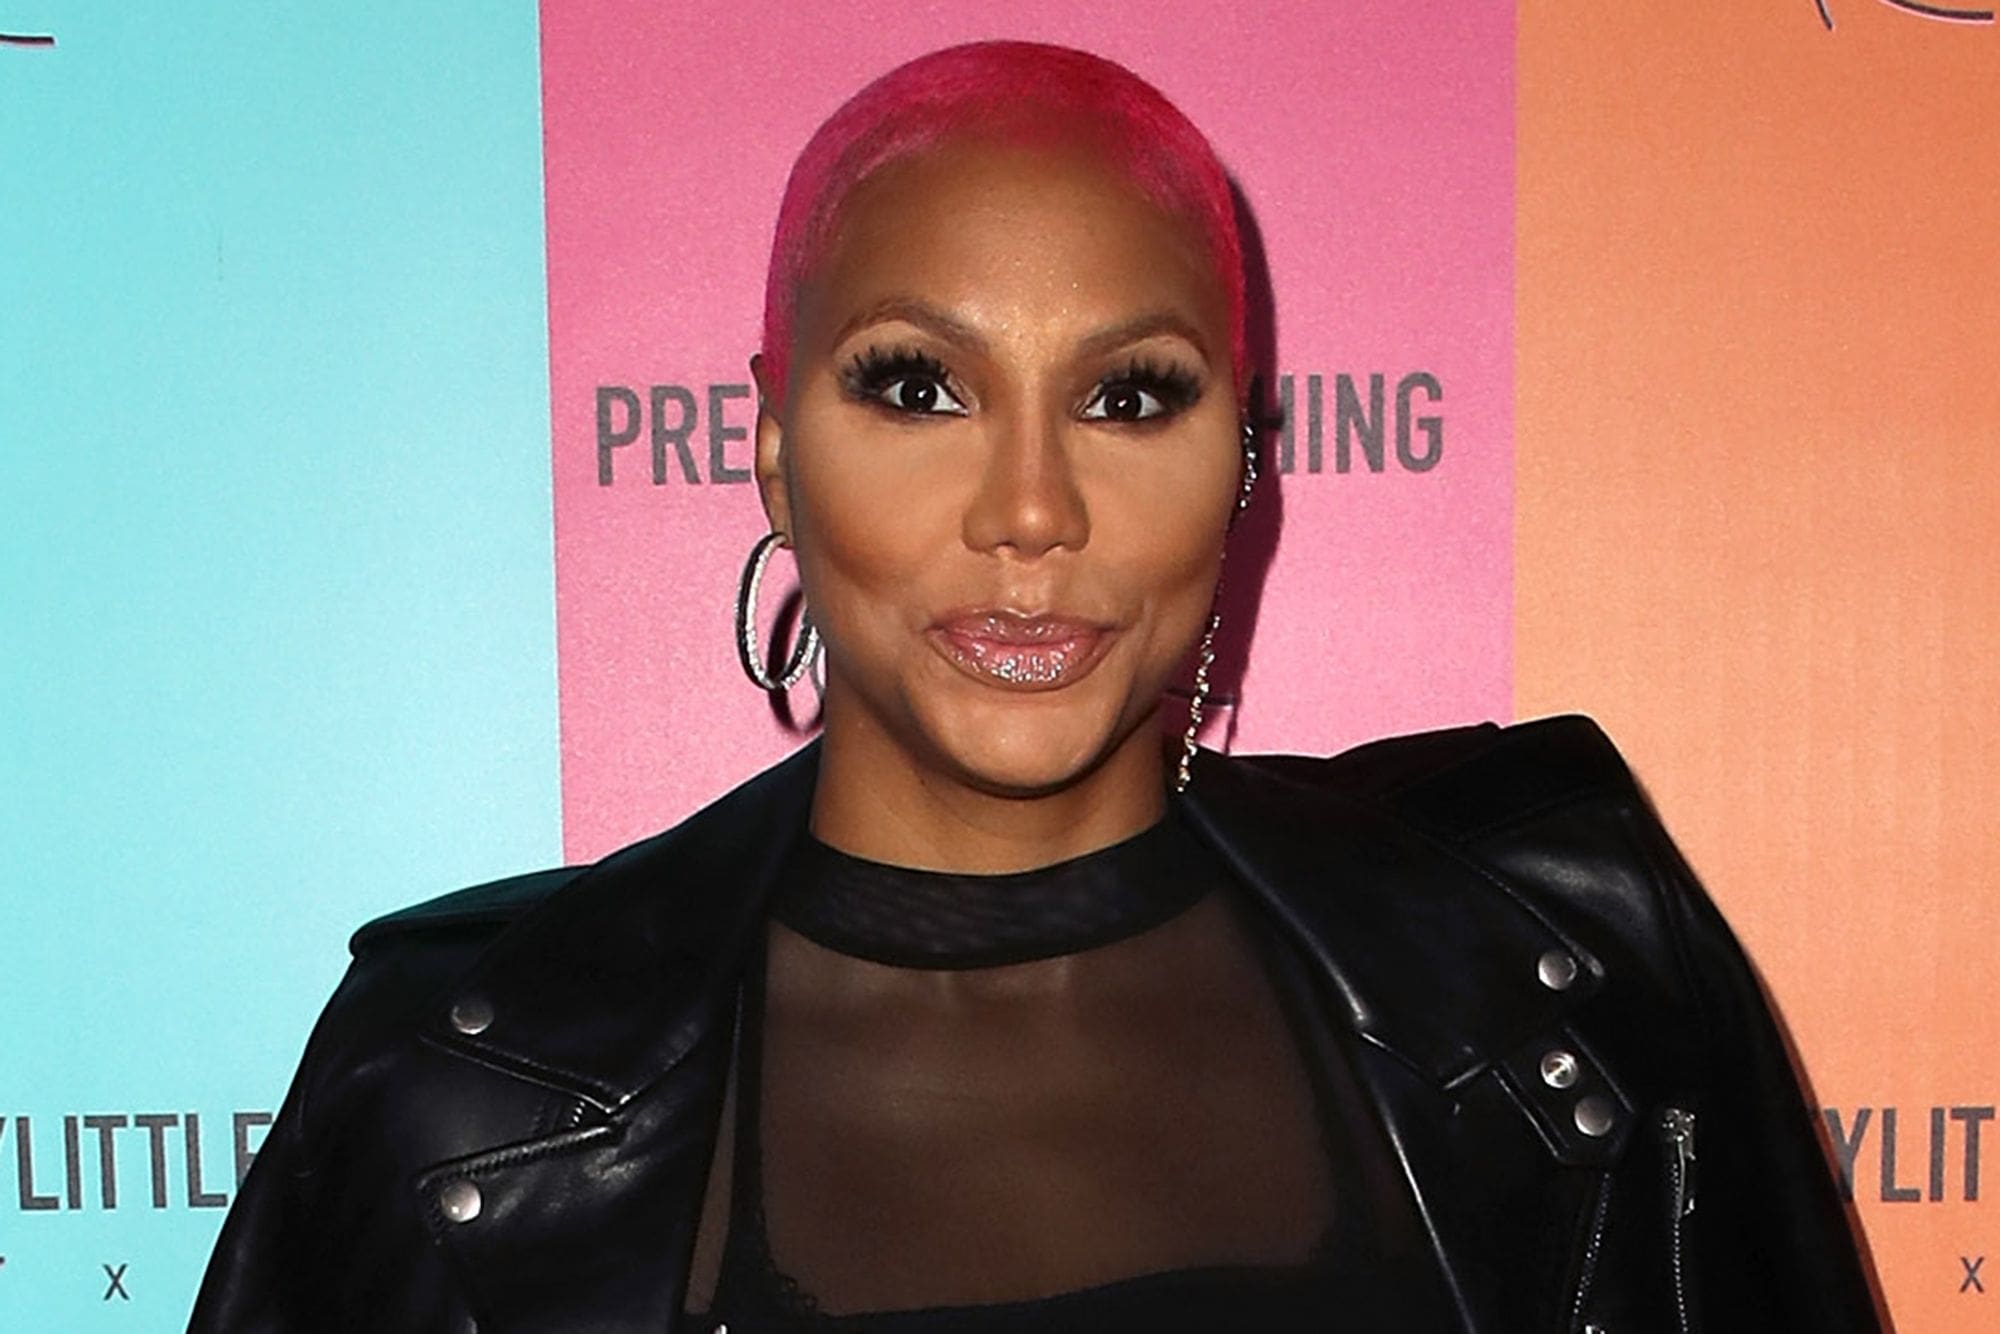 ”tamar-braxton-shares-the-saddest-video-youll-see-today”